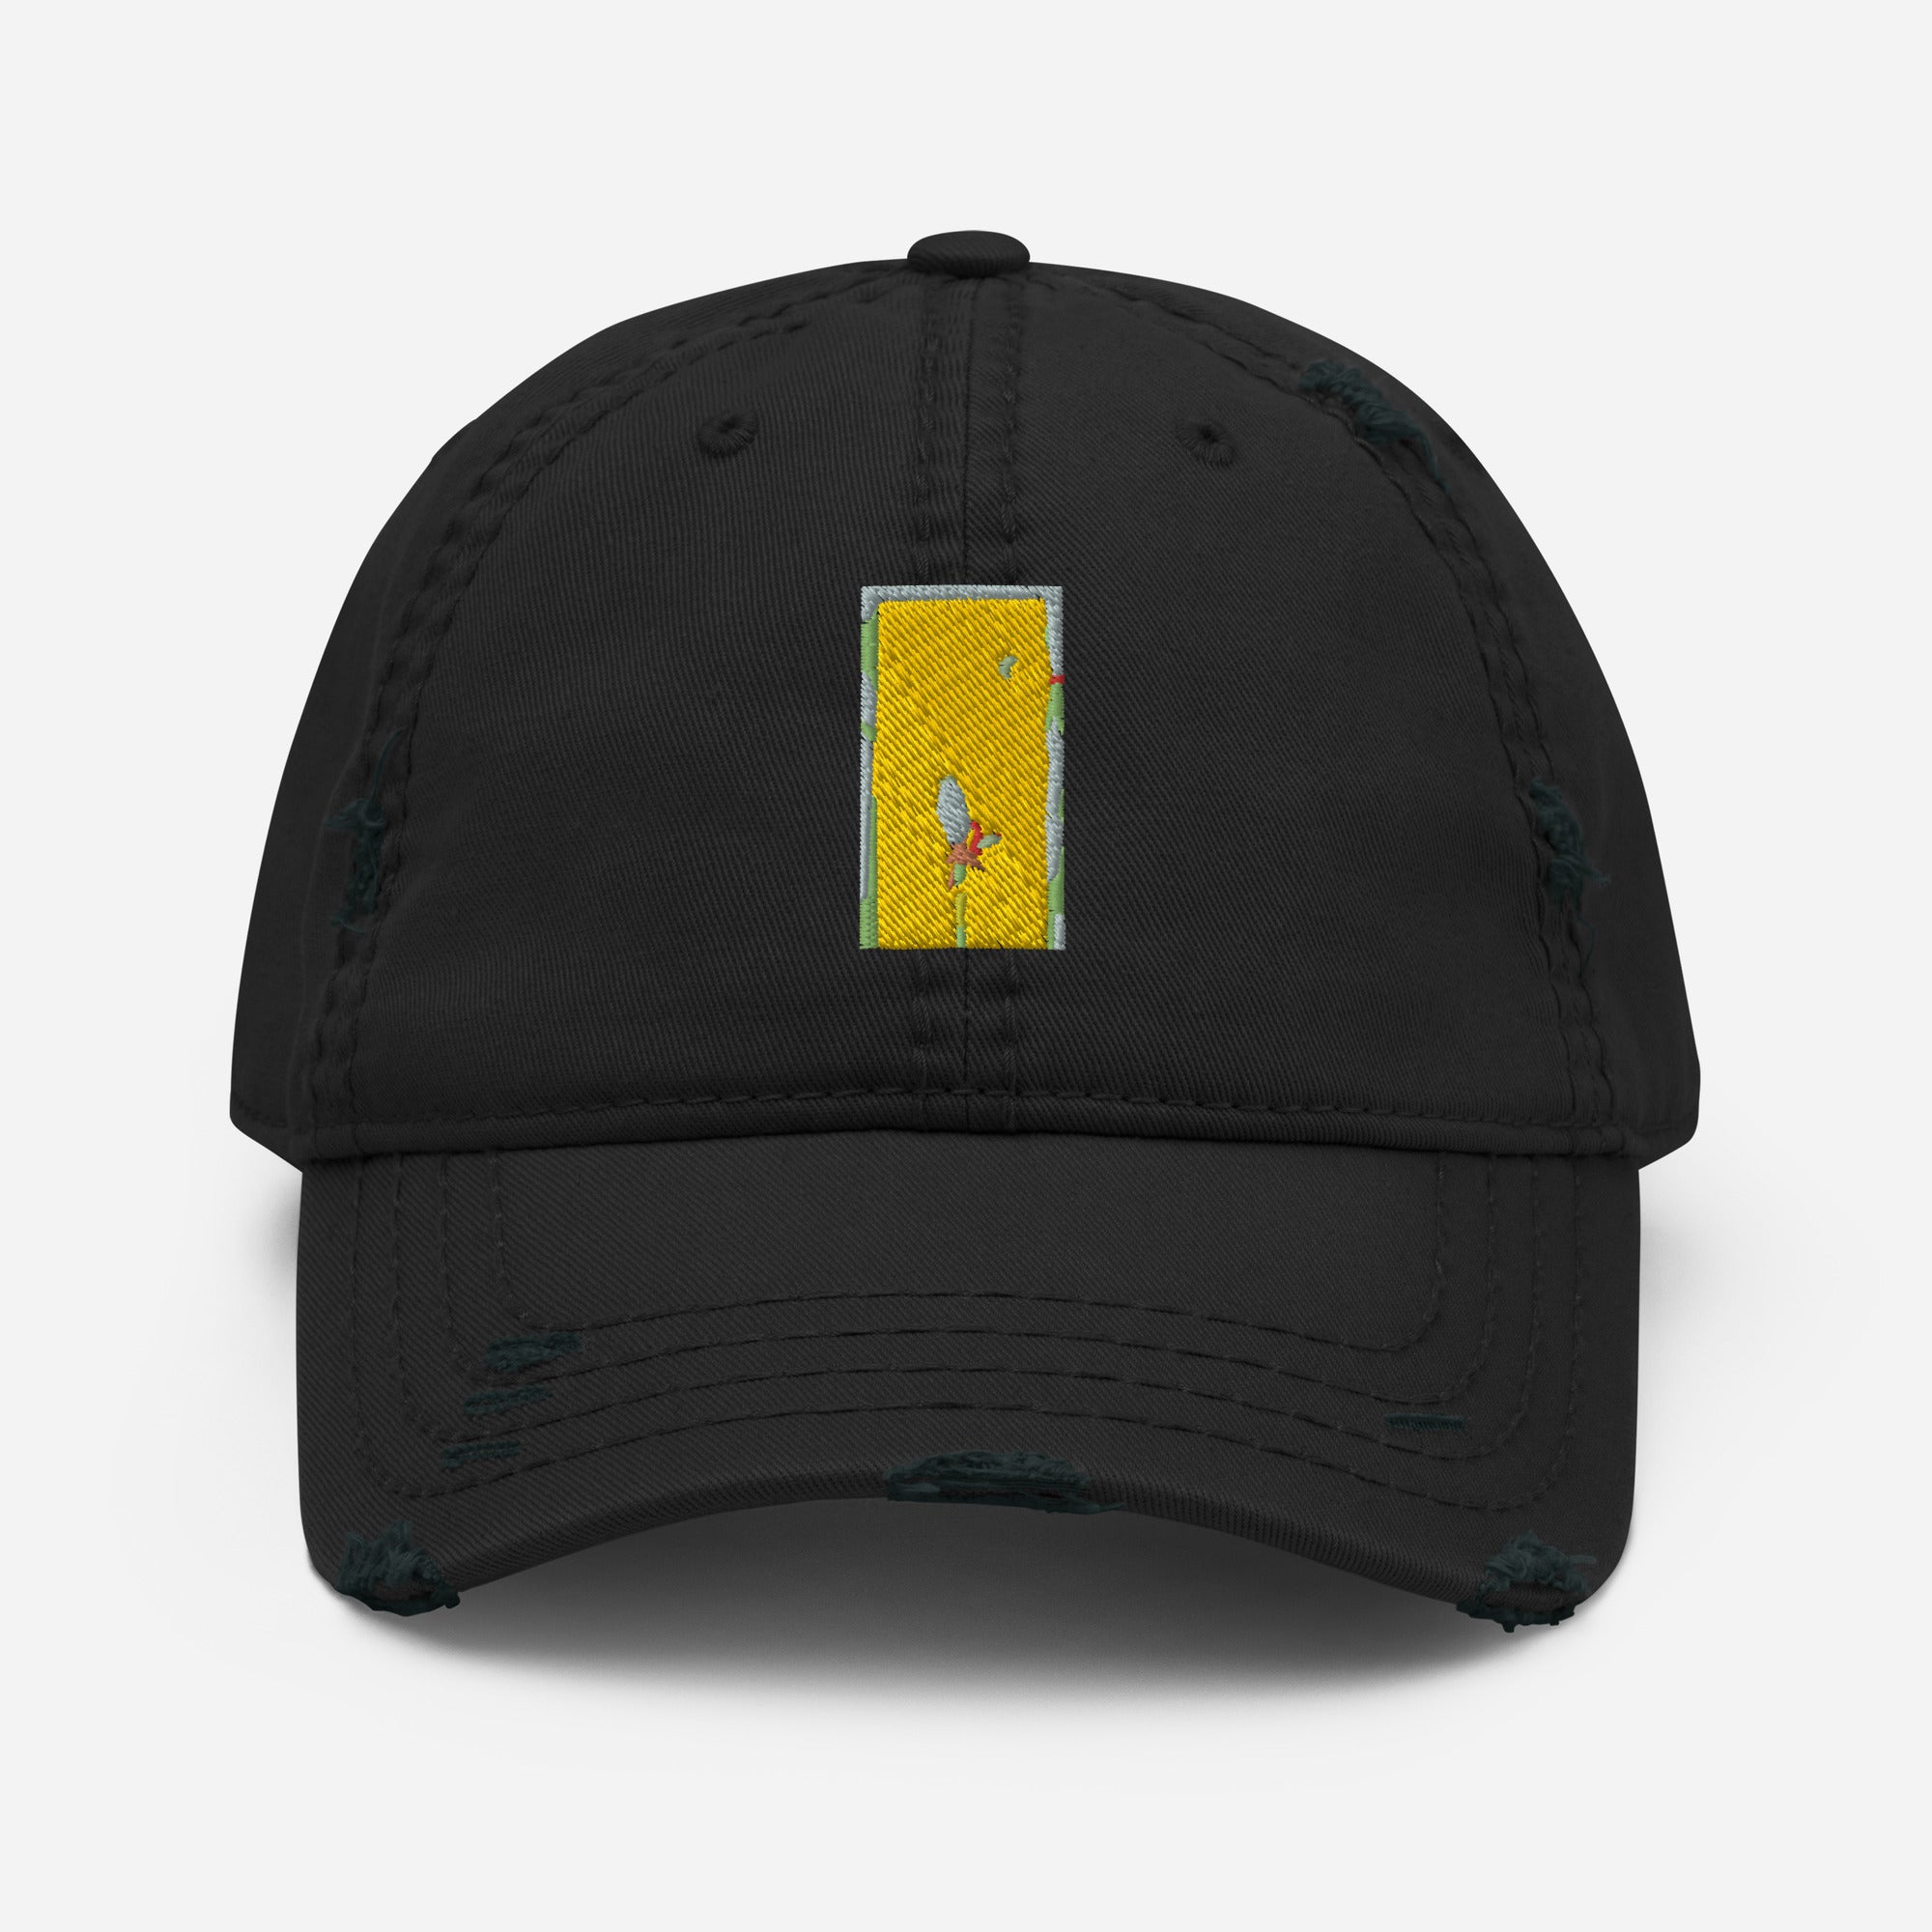 Trying Hard to find the Beauty [distressed dad hat]